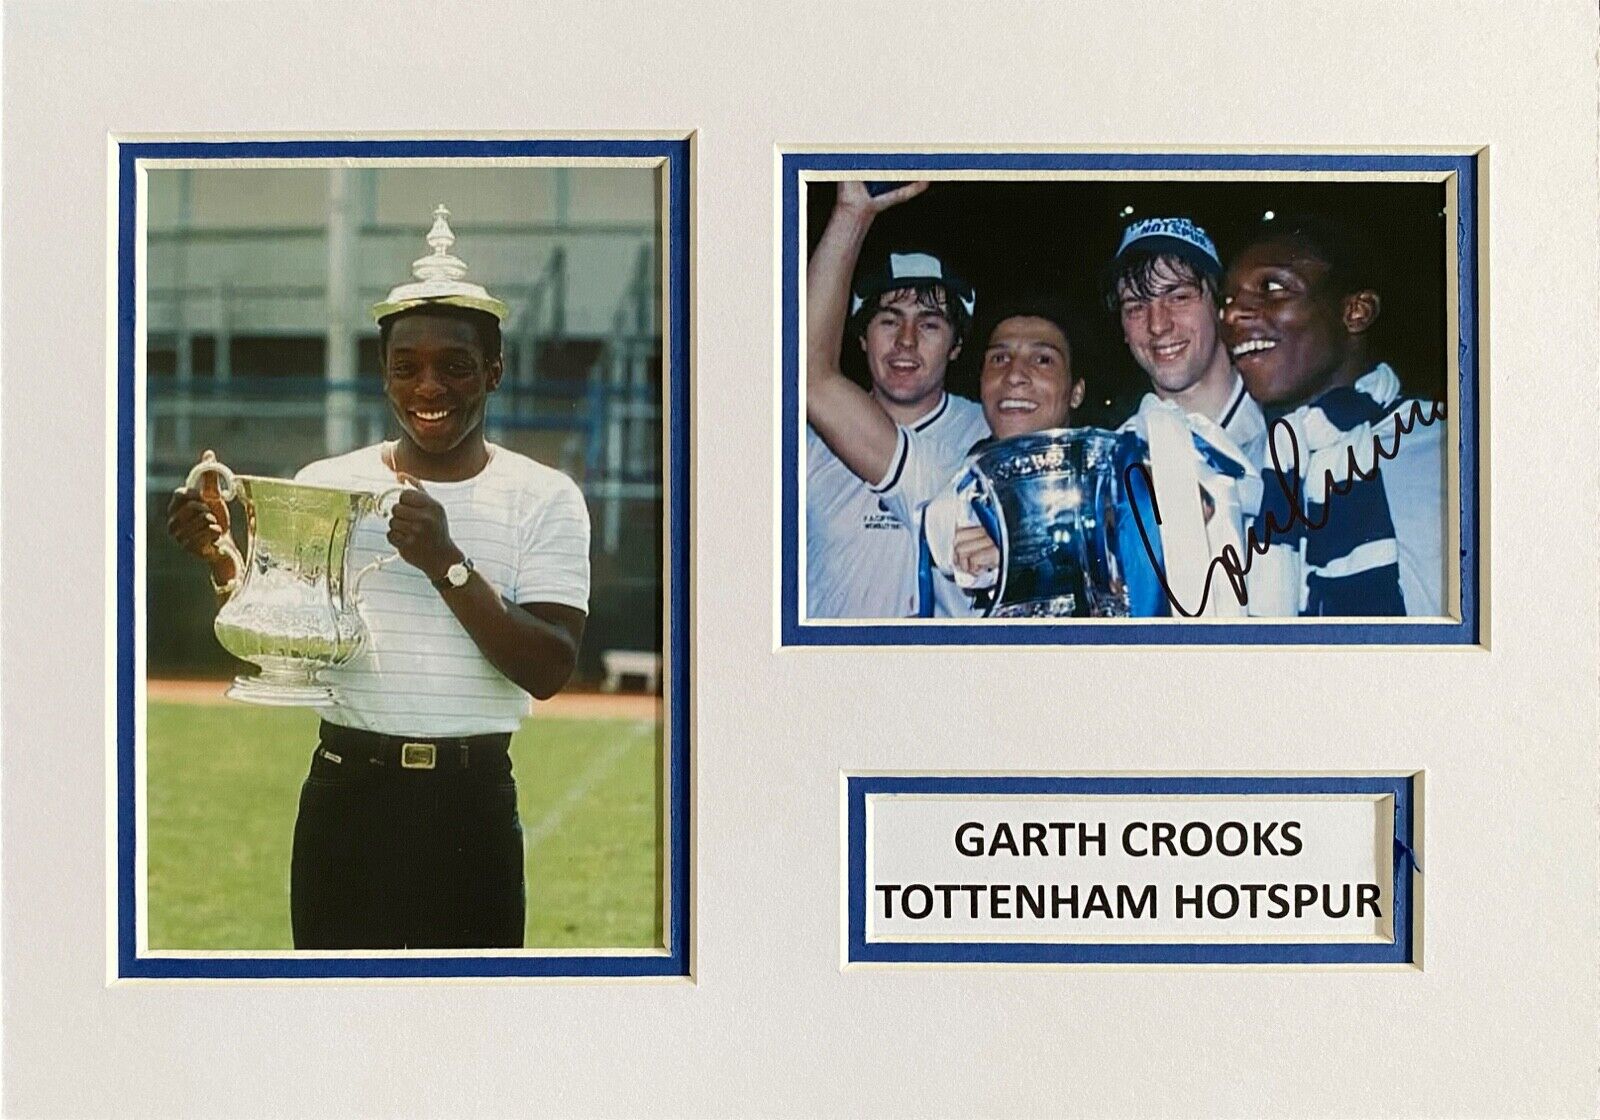 GARTH CROOKS HAND SIGNED A4 MOUNTED Photo Poster painting DISPLAY TOTTENHAM HOTSPUR AUTOGRAPH 1